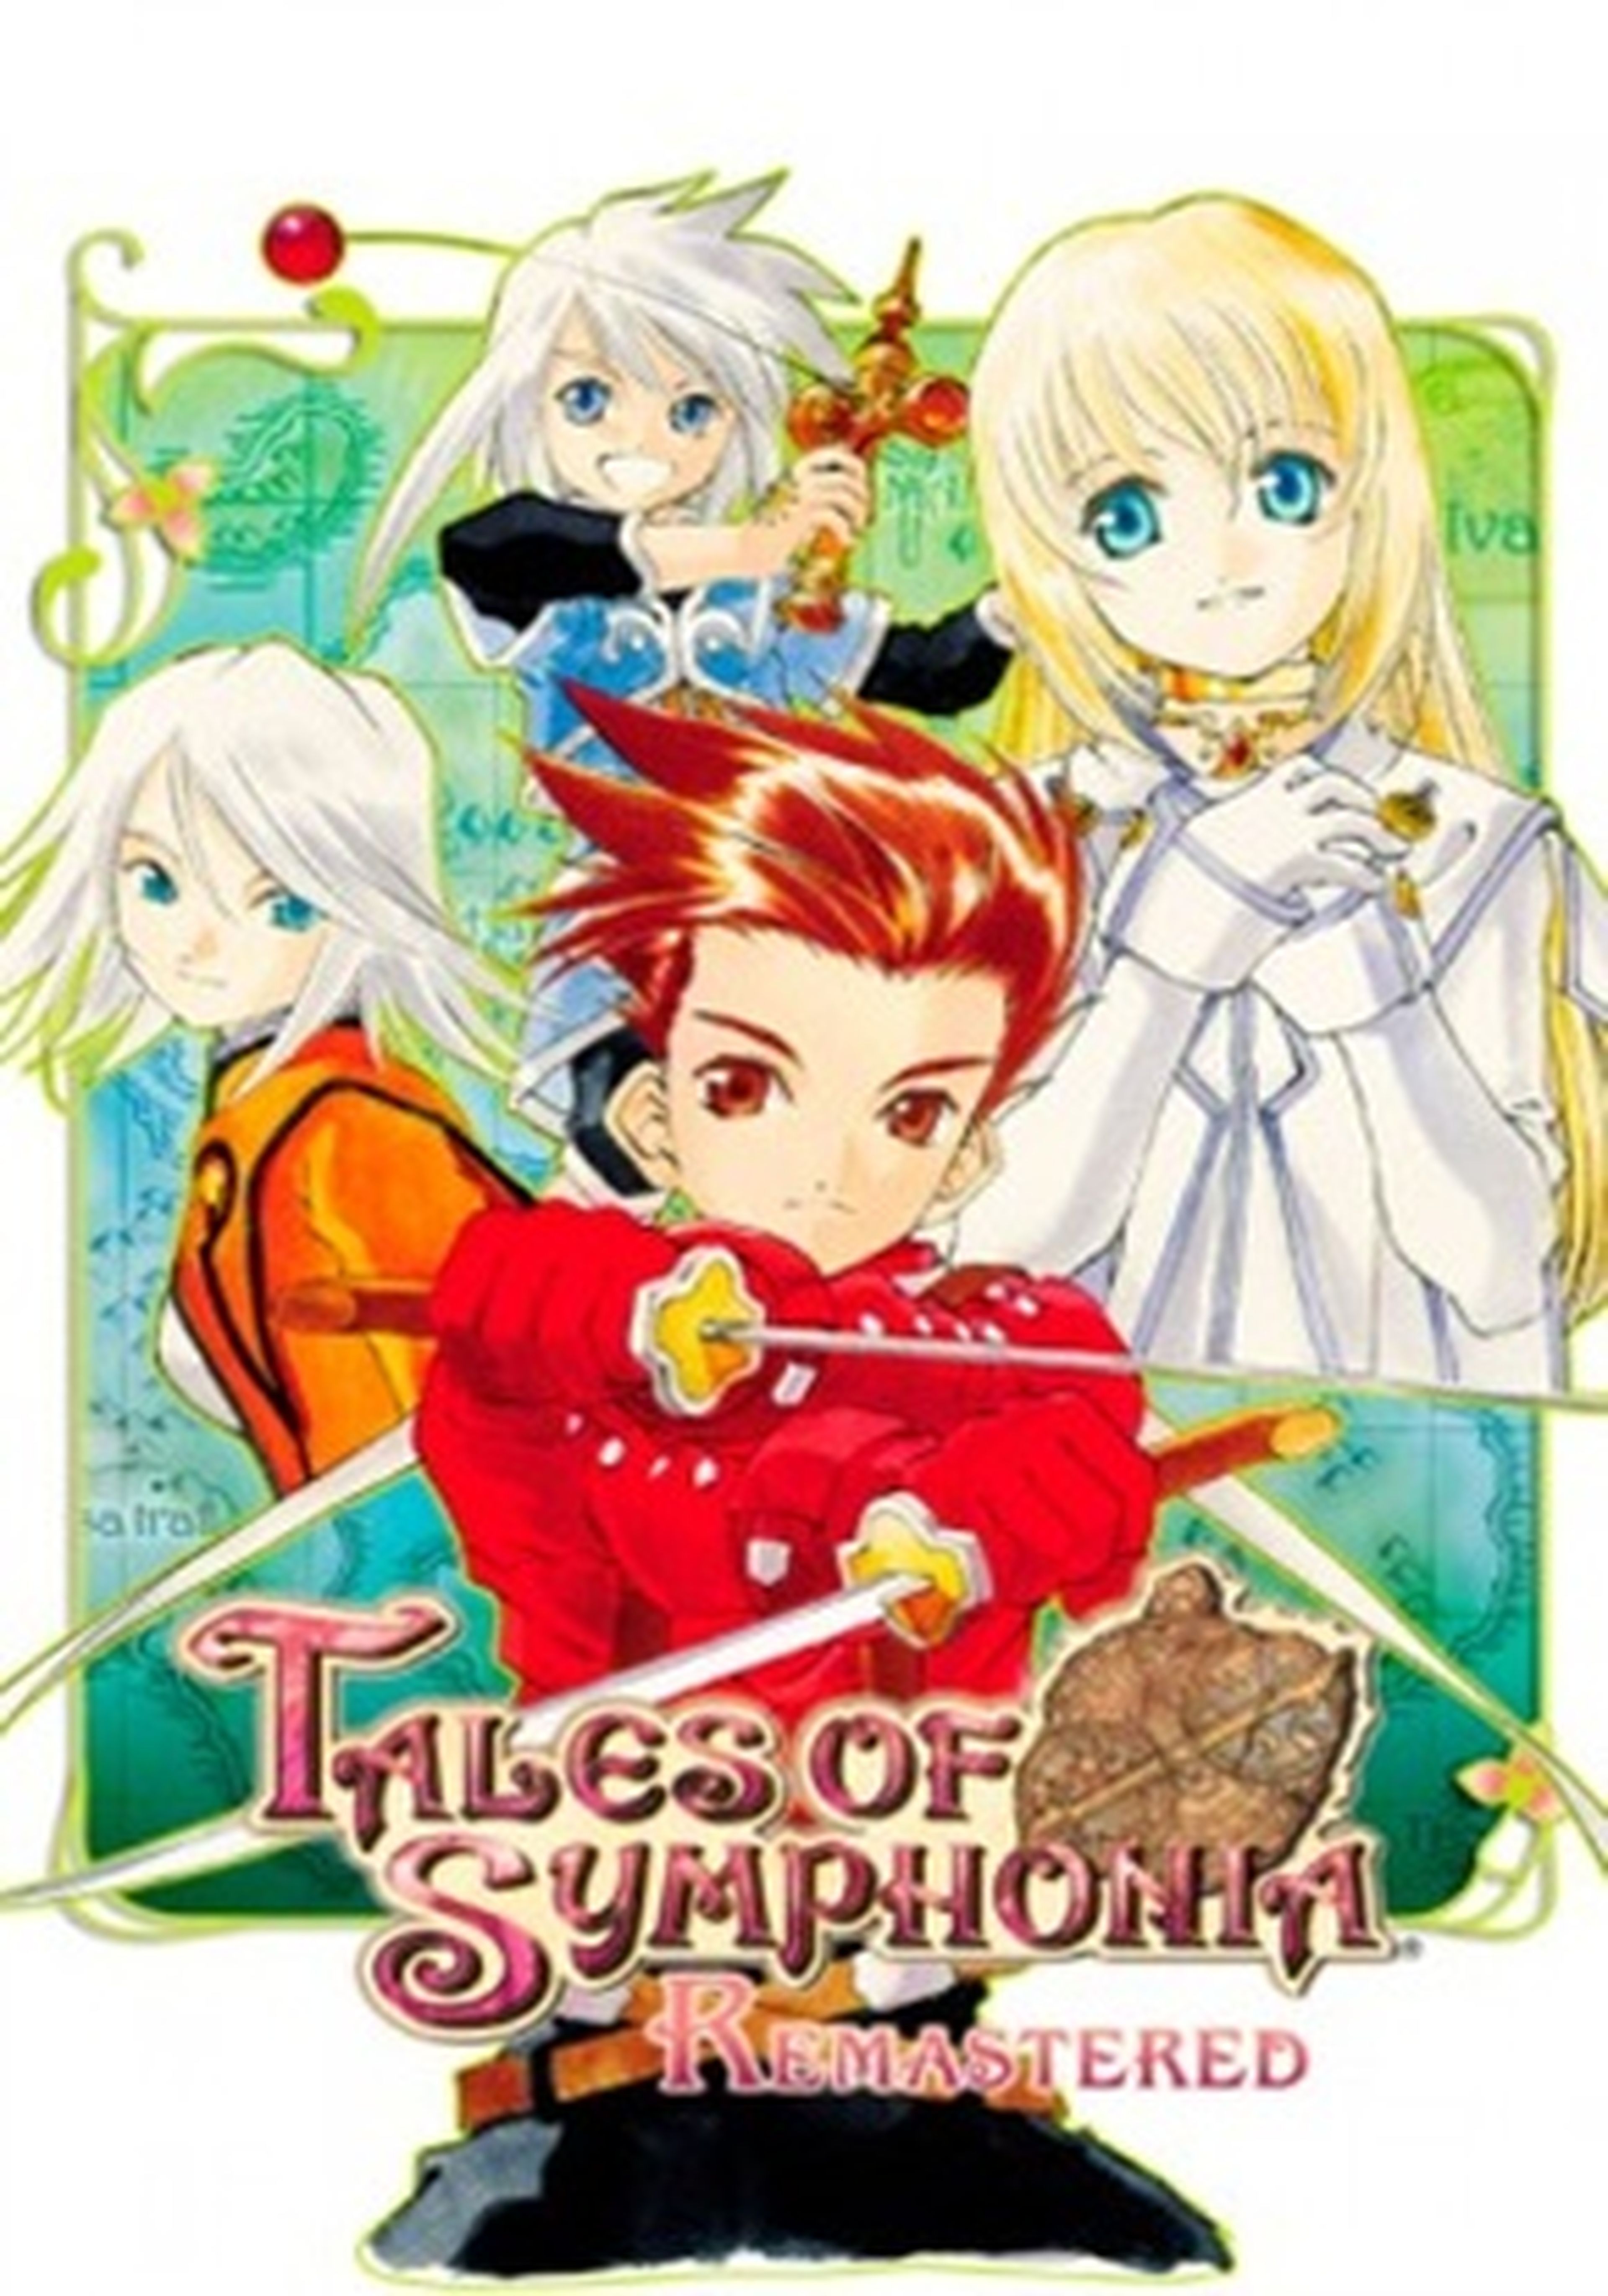 Tales of Symphonia Remastered cartel